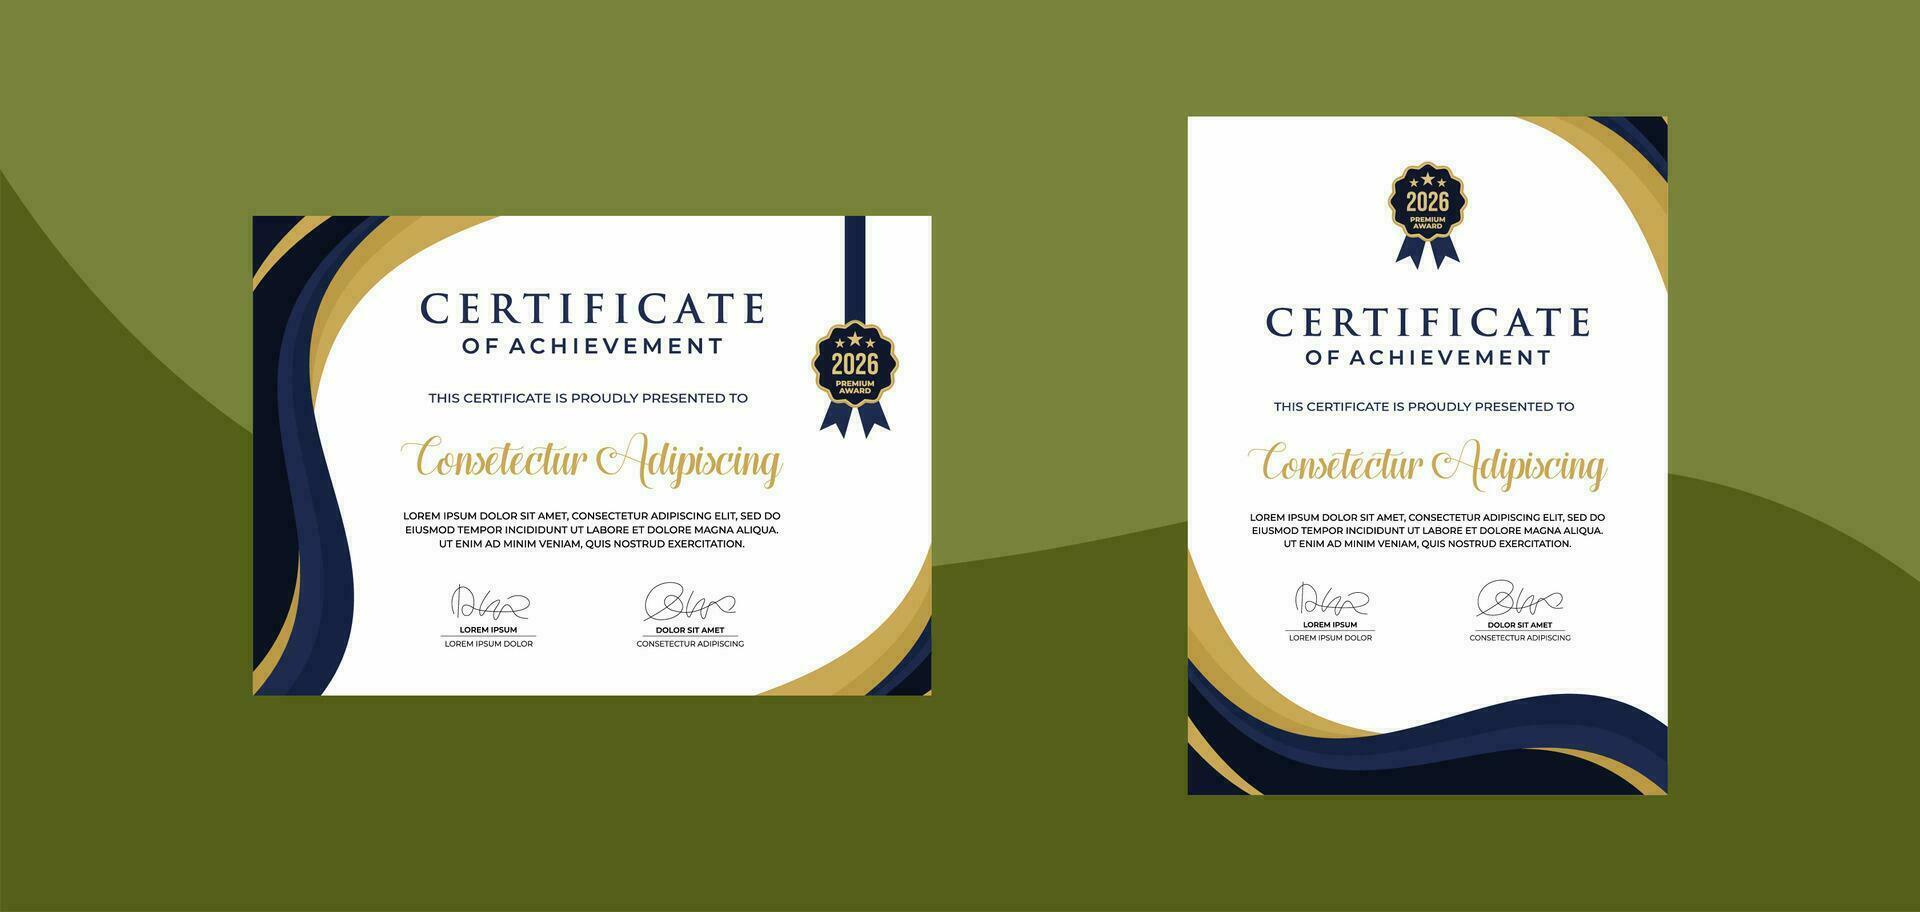 certificate of achievement template. for award, business, and education needs vector